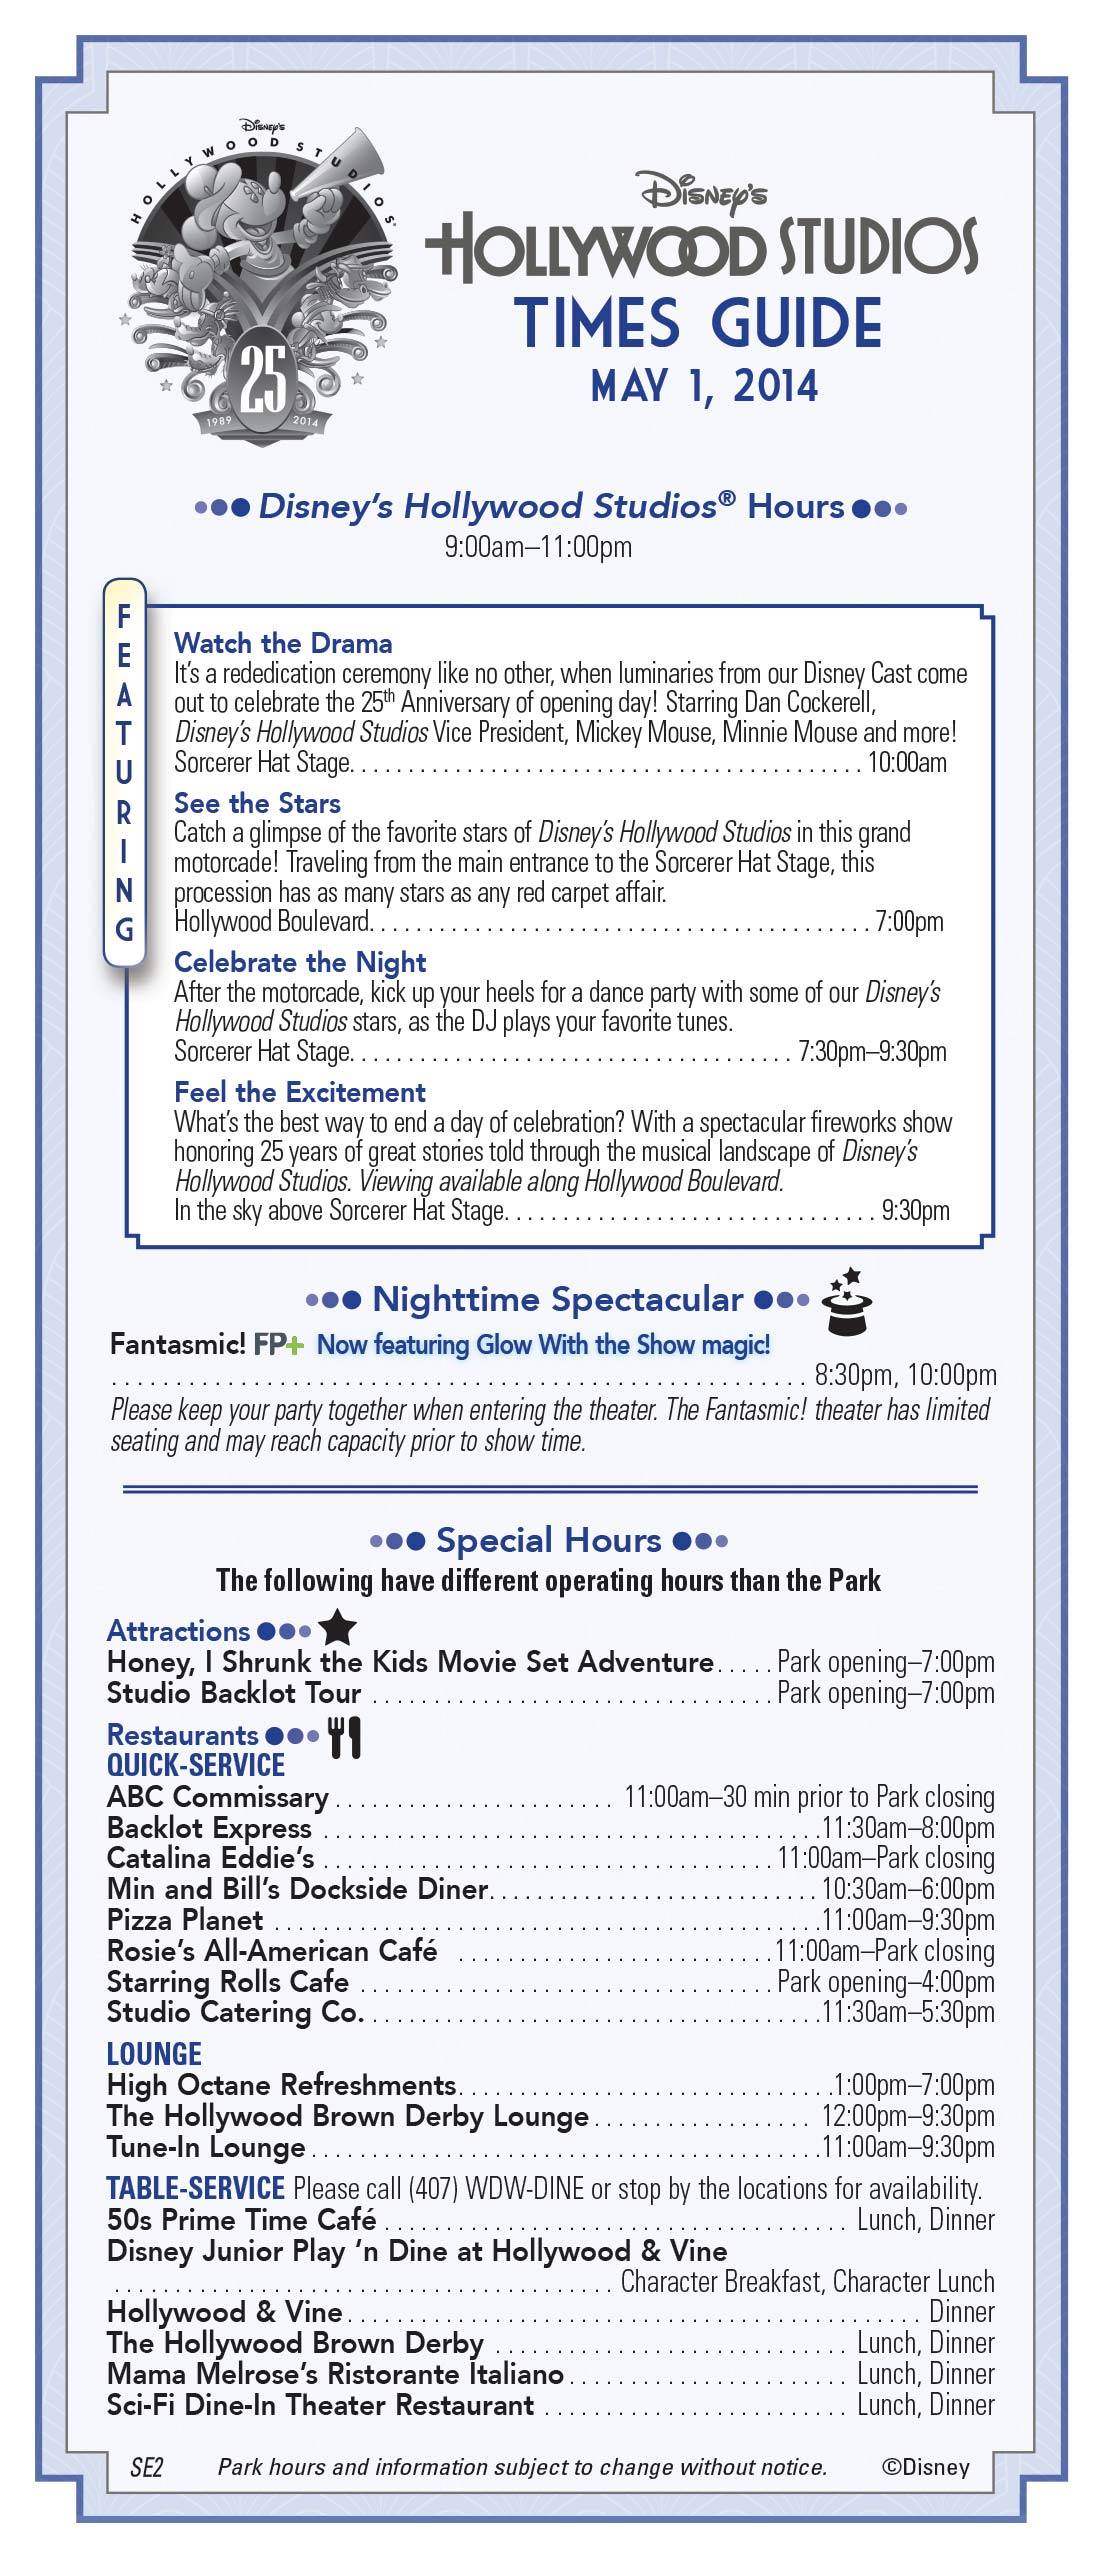 Disney's Hollywood Studios 25th Anniversary times guide front